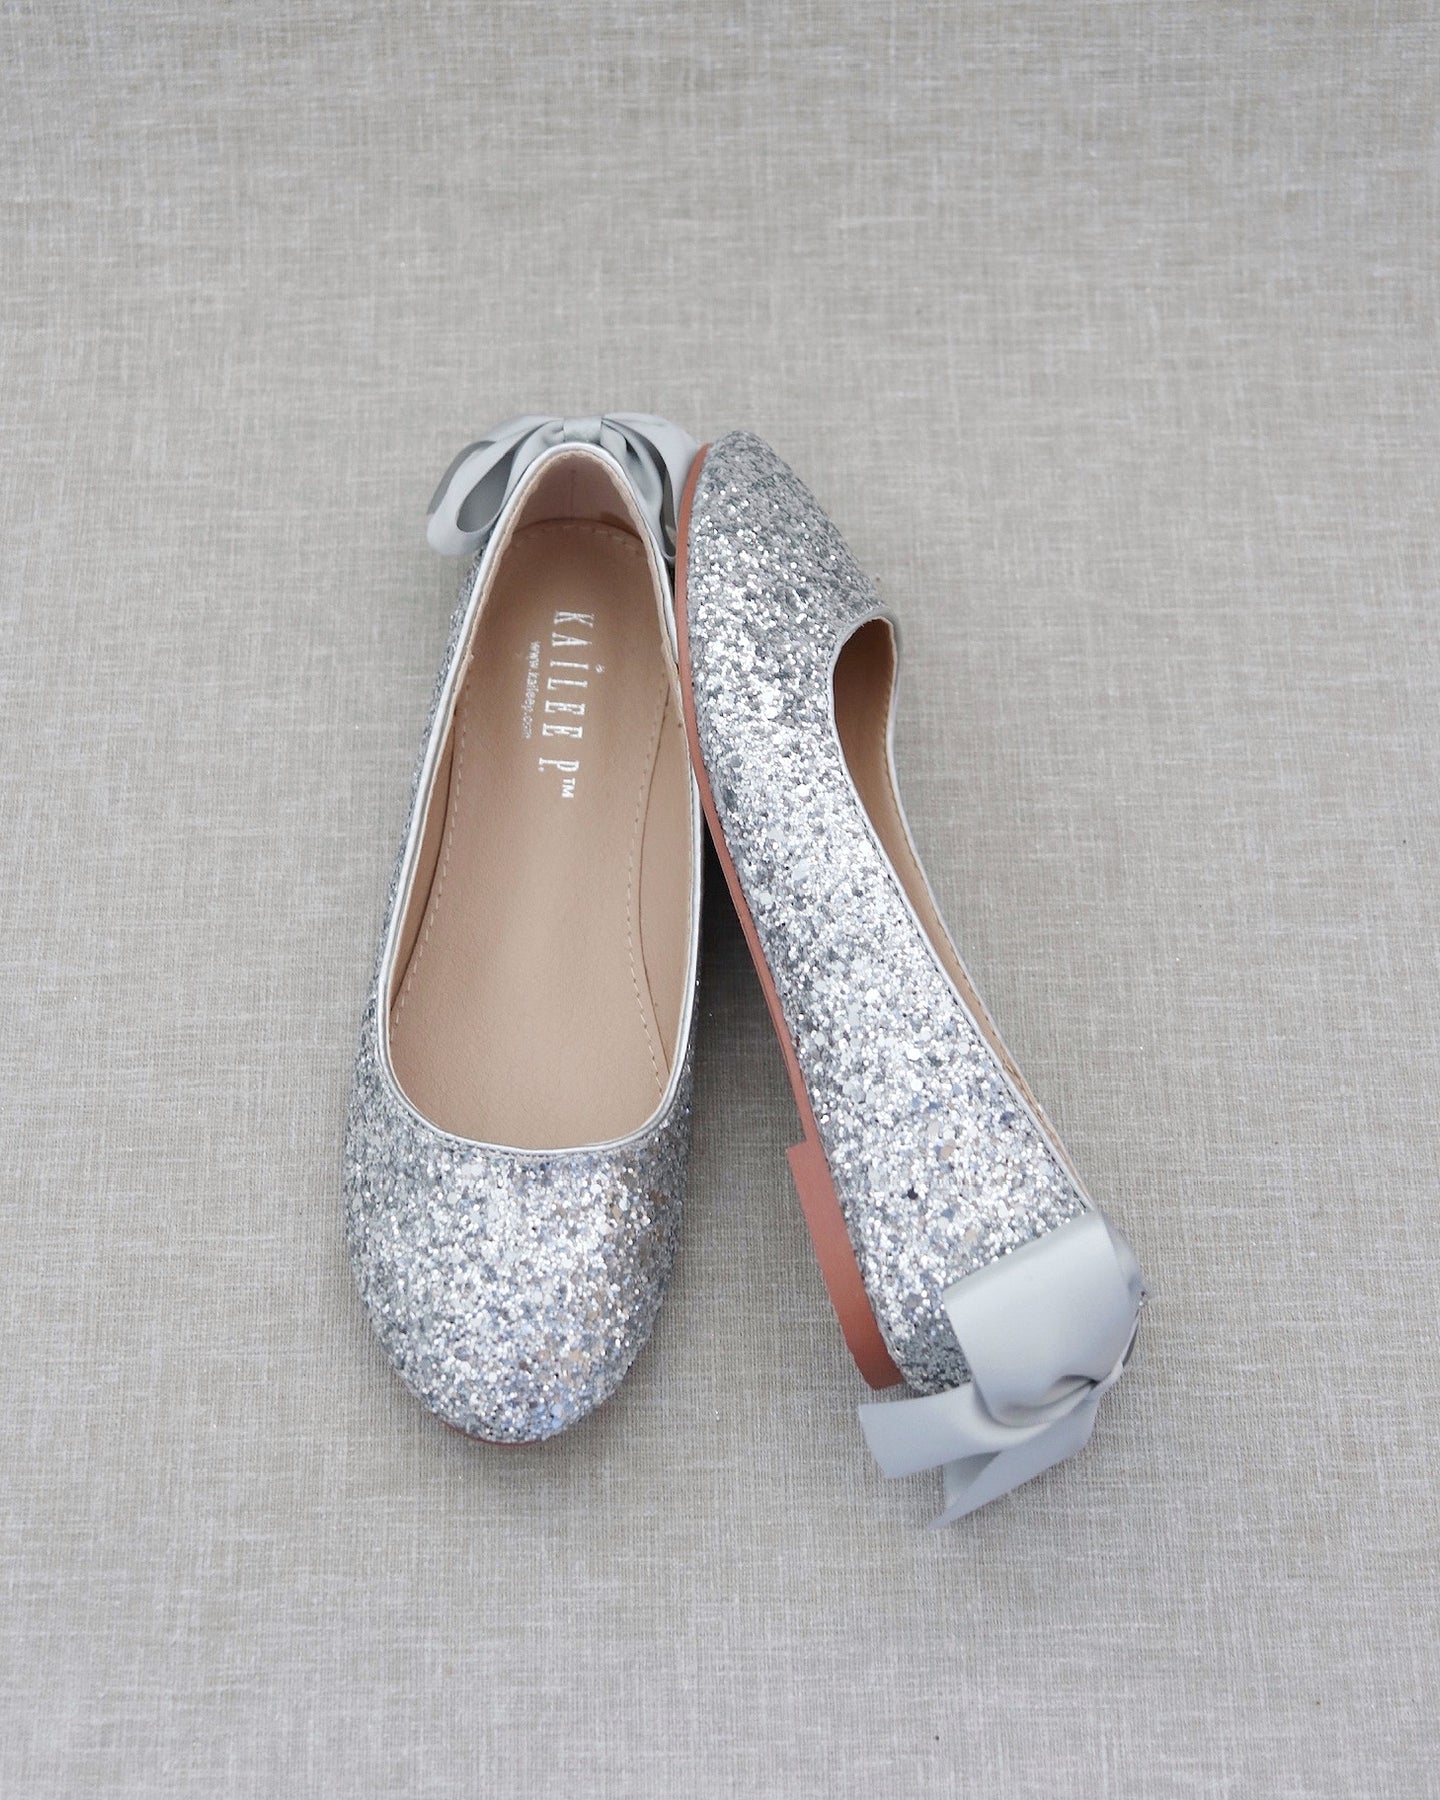 Silver Glitter Round Toe Flats with Bow, Wedding Shoes, Bridesmaid Flat ...